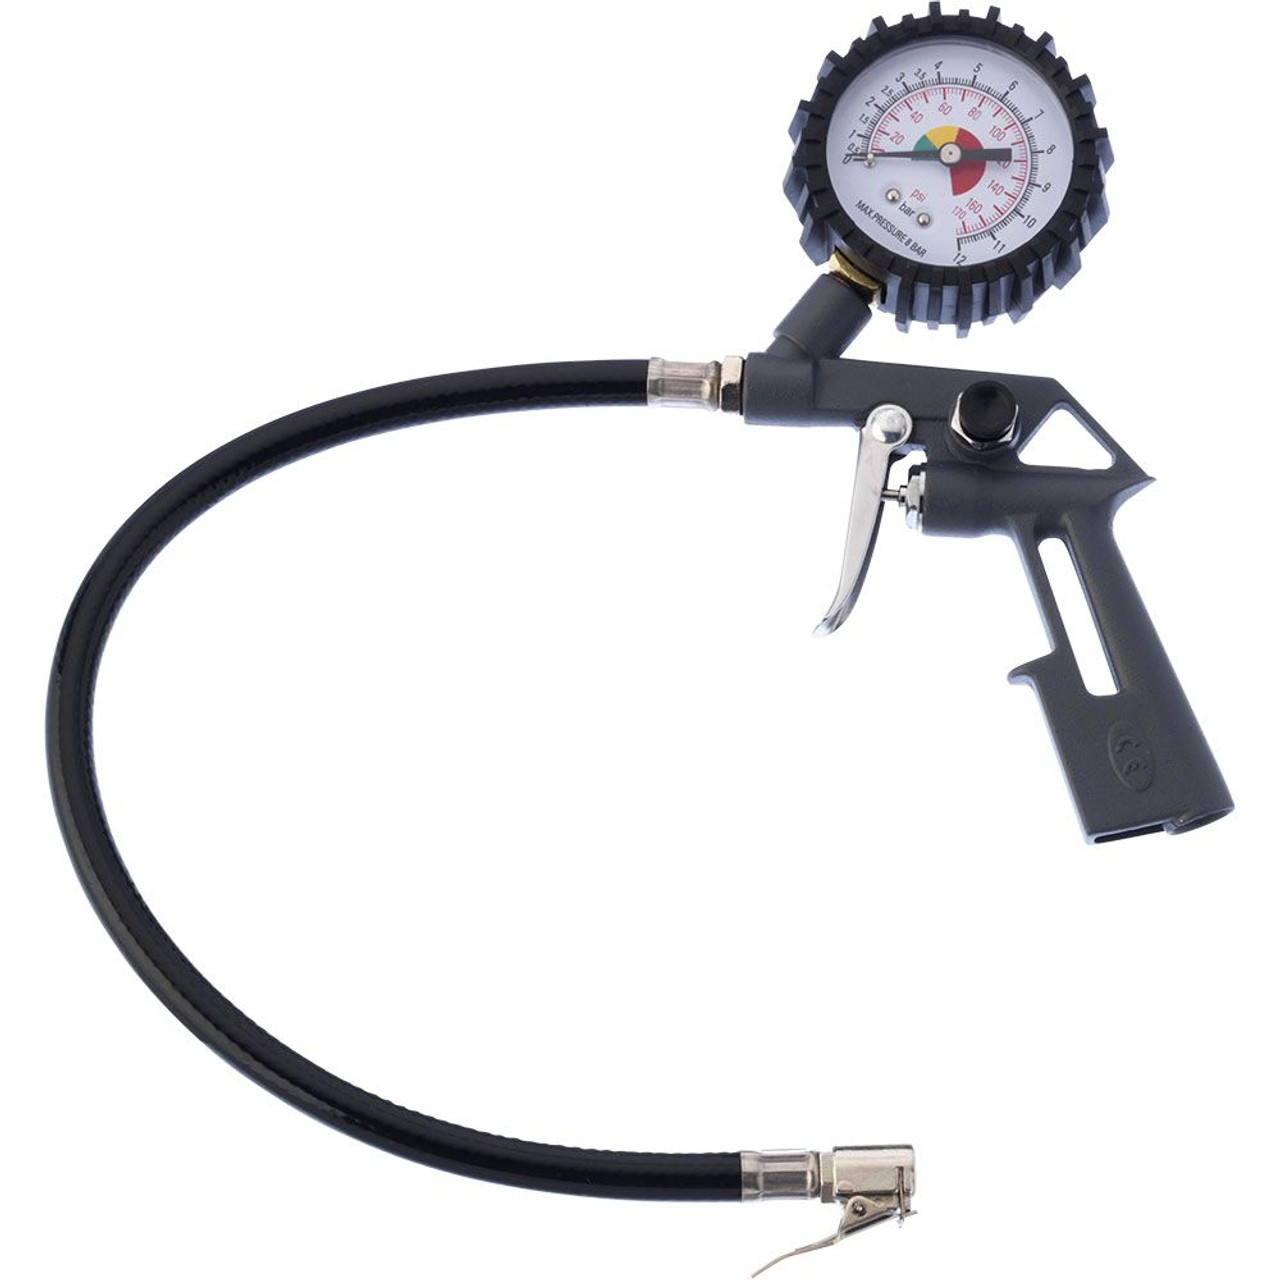 PCL Digital Inflator Gauge (170 PSI / Clip-On) - All Tire Supply